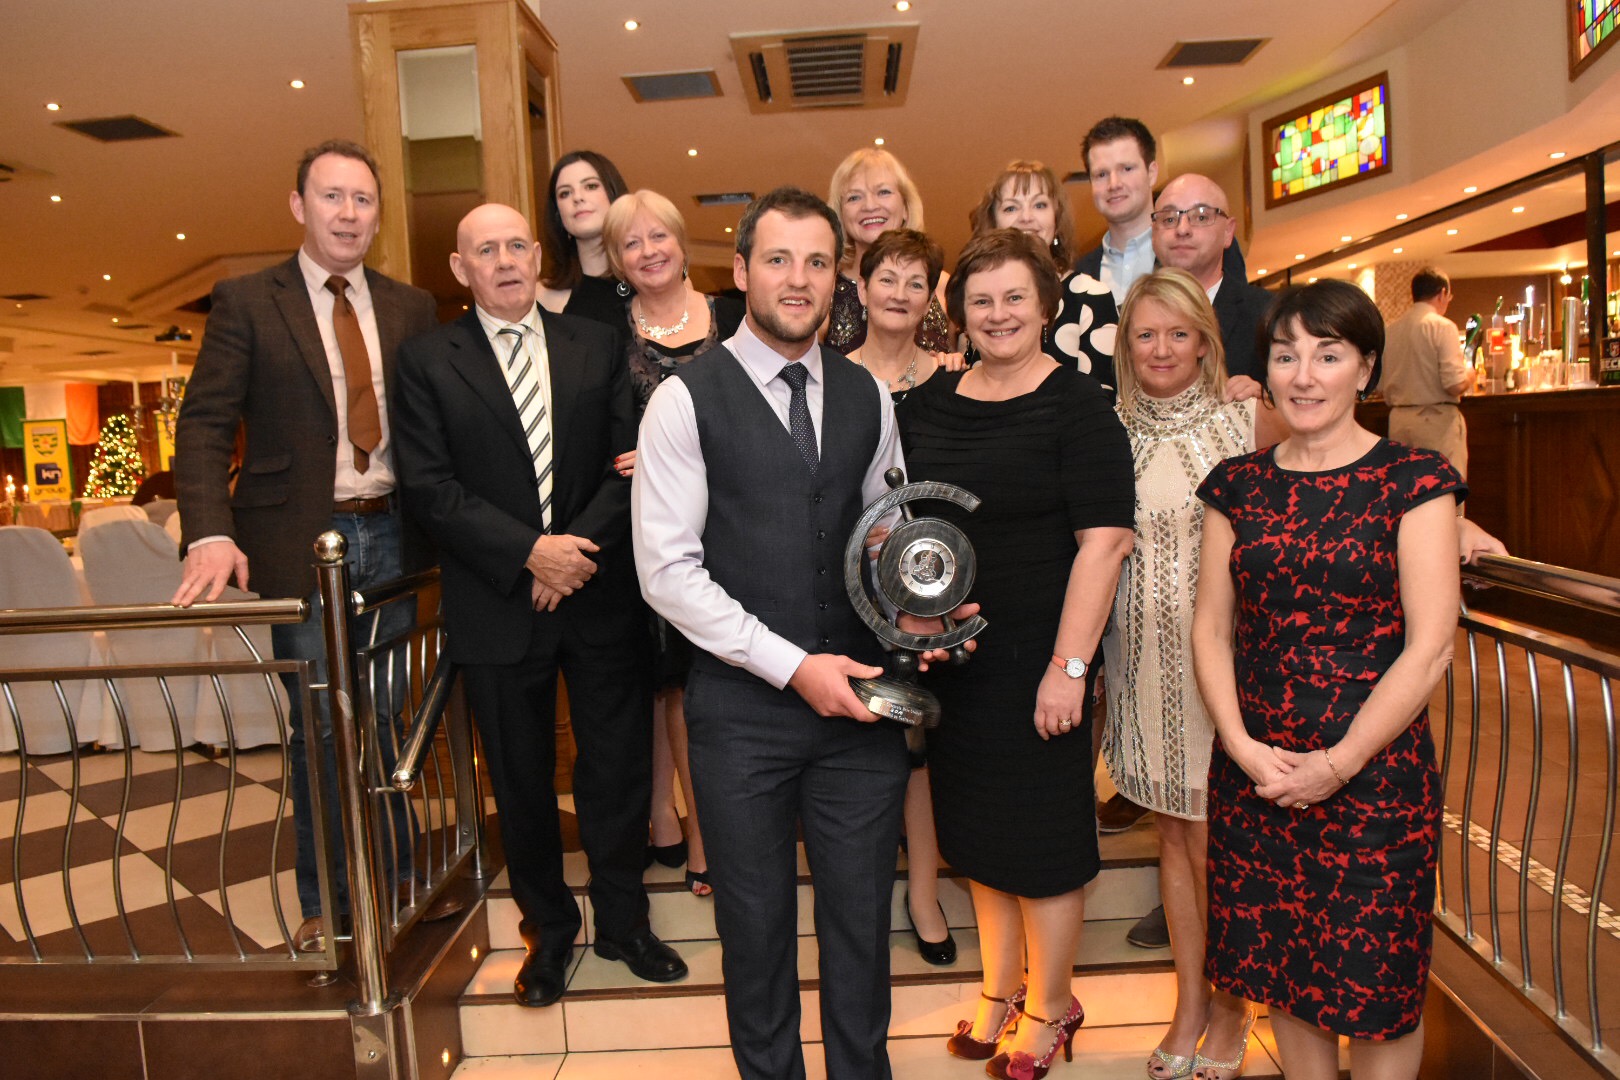 Members of RTÉ RnaG Doirí Beaga staff with Michael Murphy, Dolores Mhic Géidigh and Edel Ní Chuireáin. In this photo Michael holds a clock by Fergal Megannety, part of the presentation of the award for this inaugural year, which he can keep.